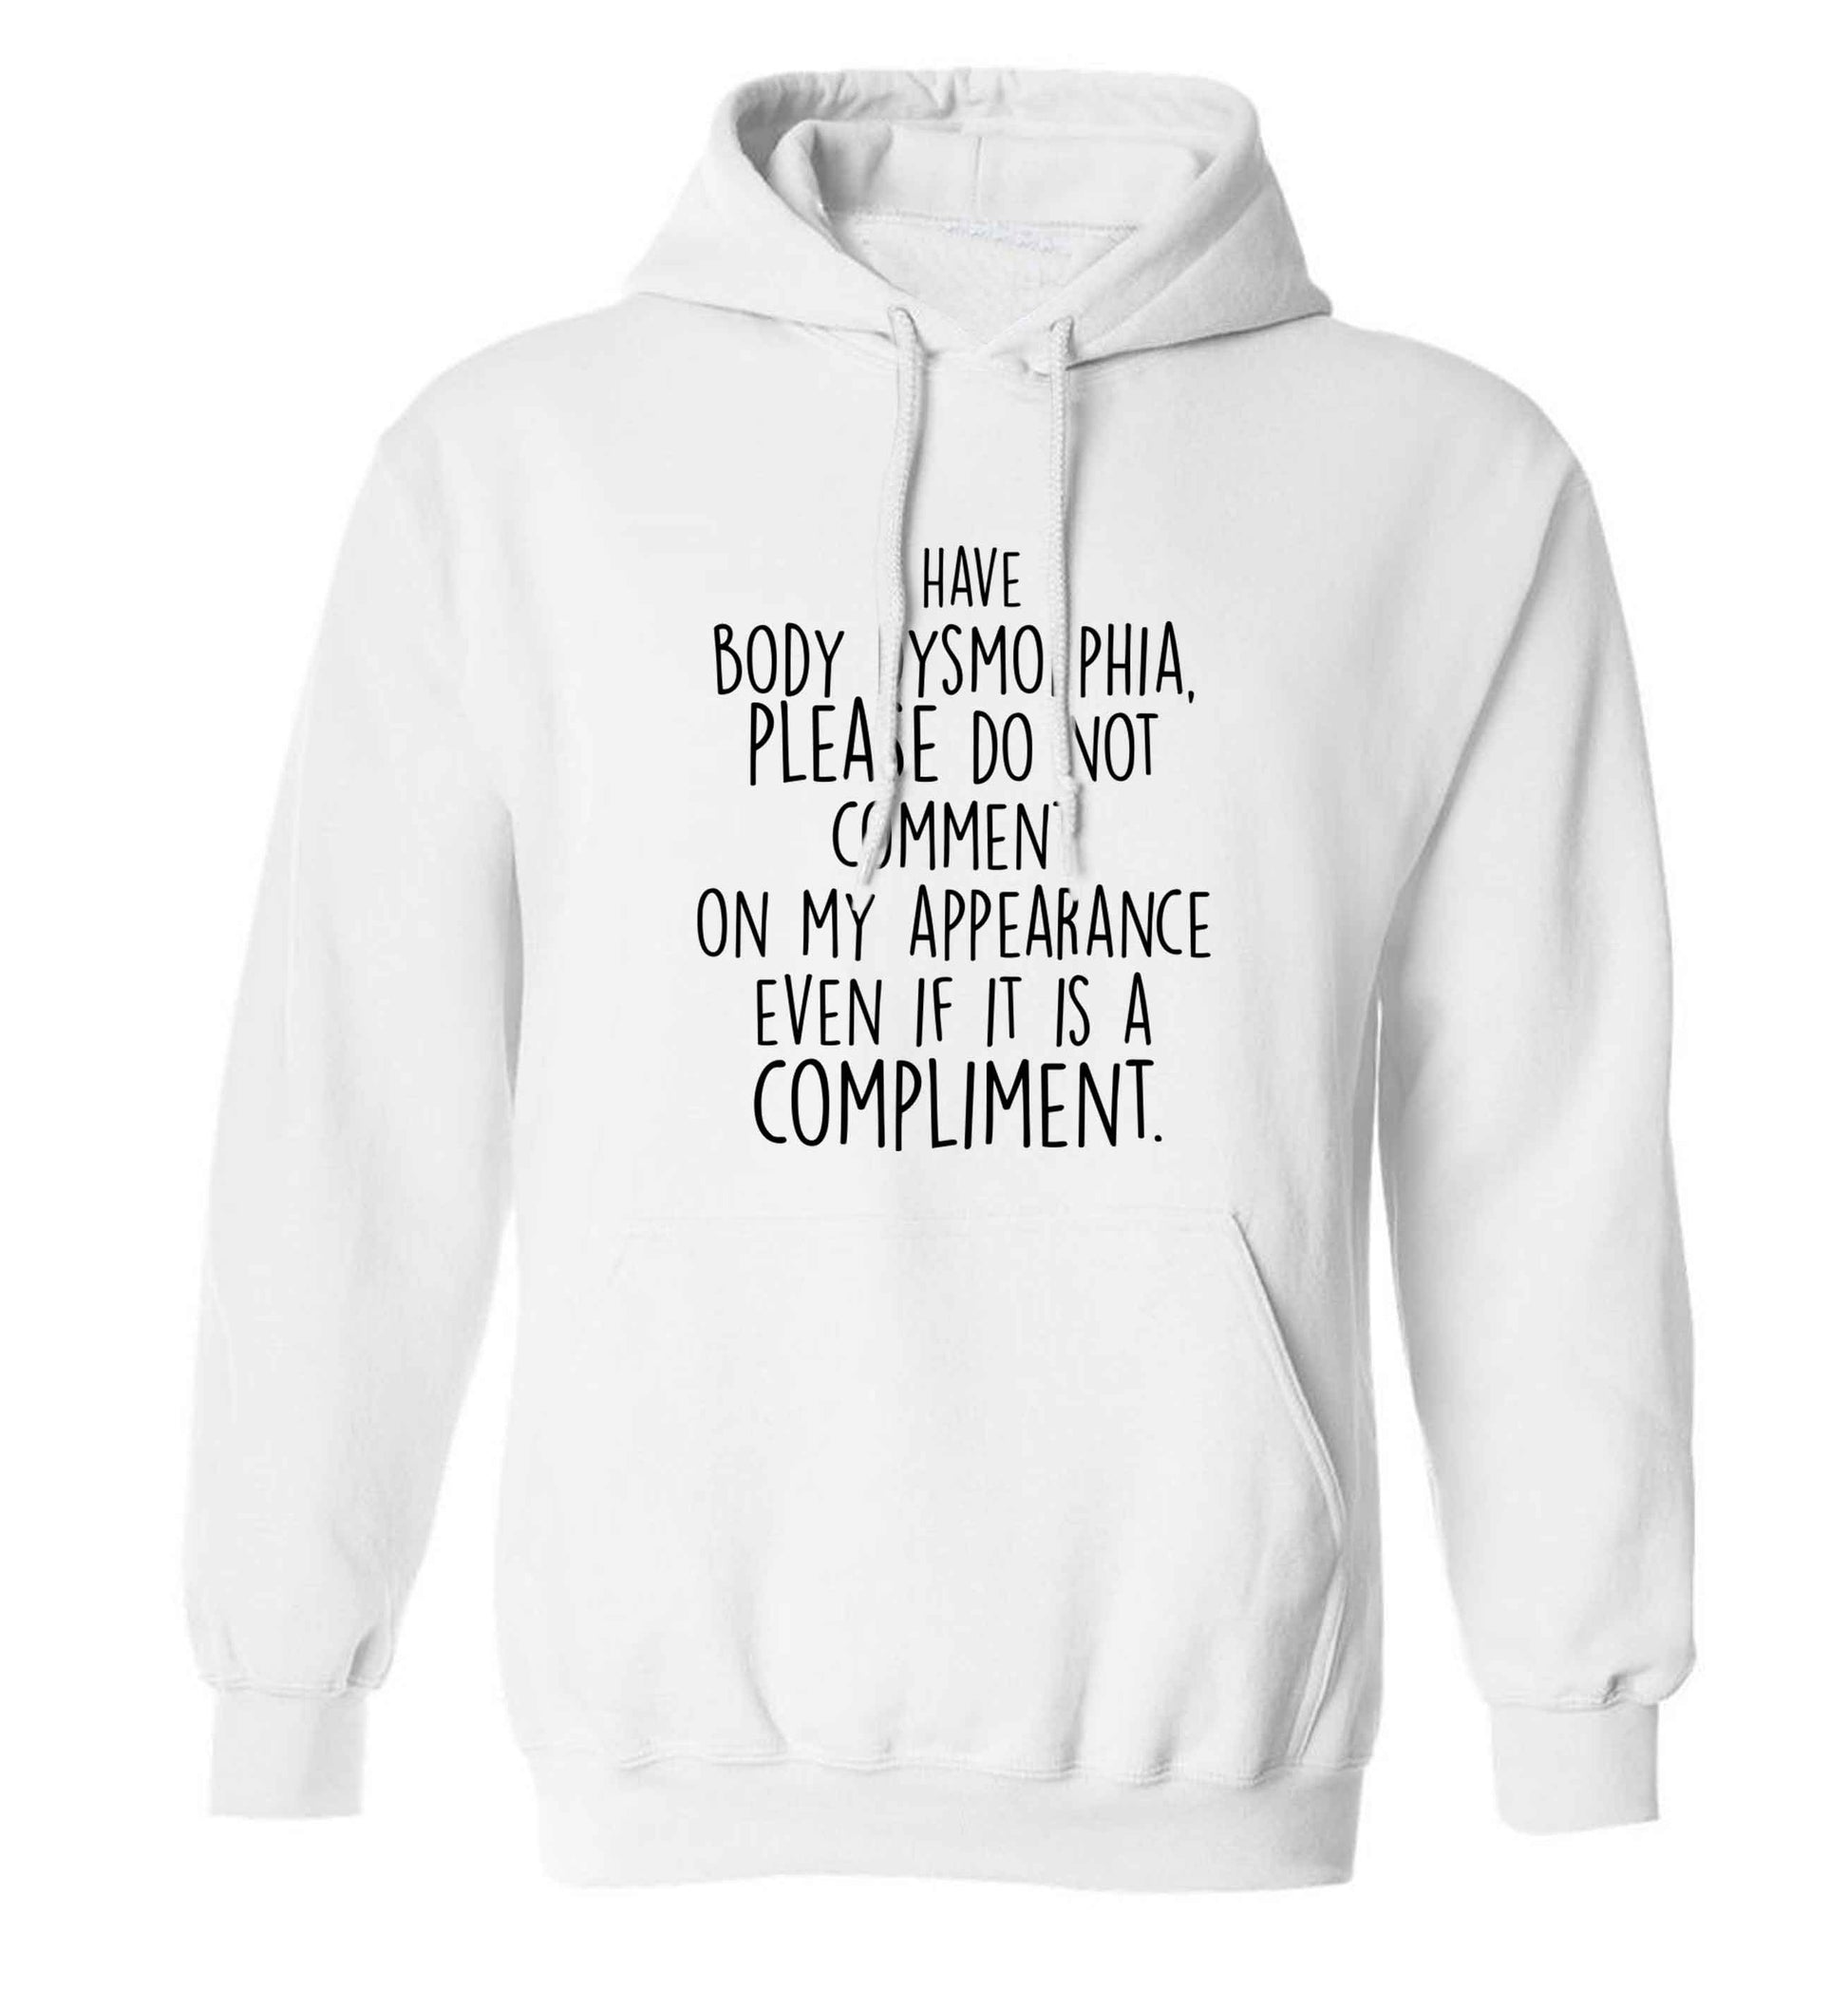 I have body dysmorphia, please do not comment on my appearance even if it is a compliment adults unisex white hoodie 2XL